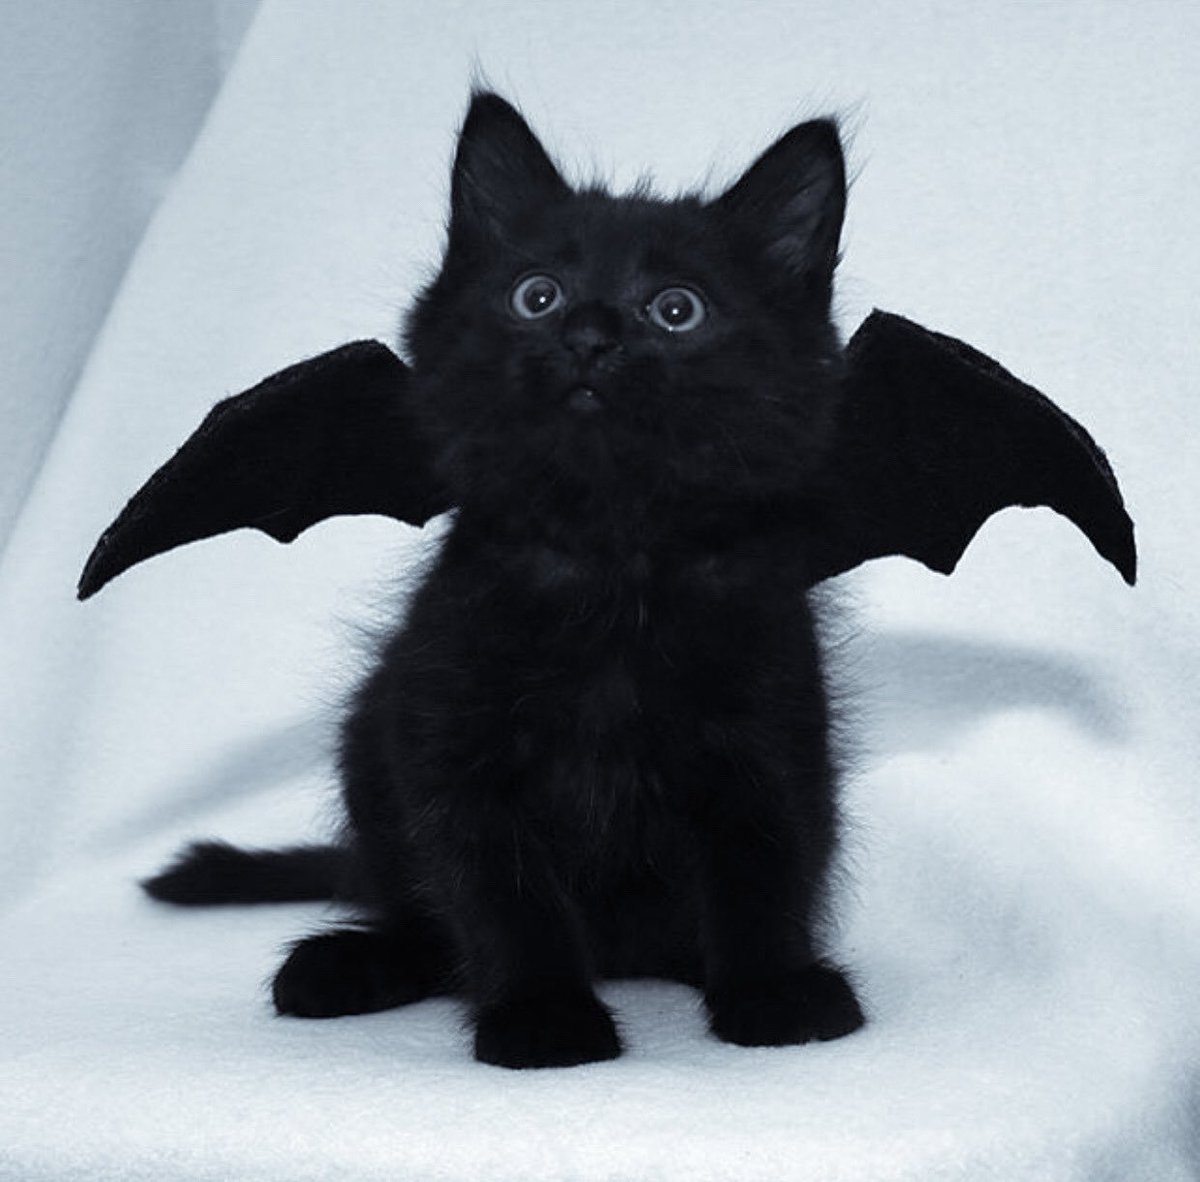 day 70 of nhlers as cute animals: in honor of spooky season we have cahtah haht as little black cat with wings 